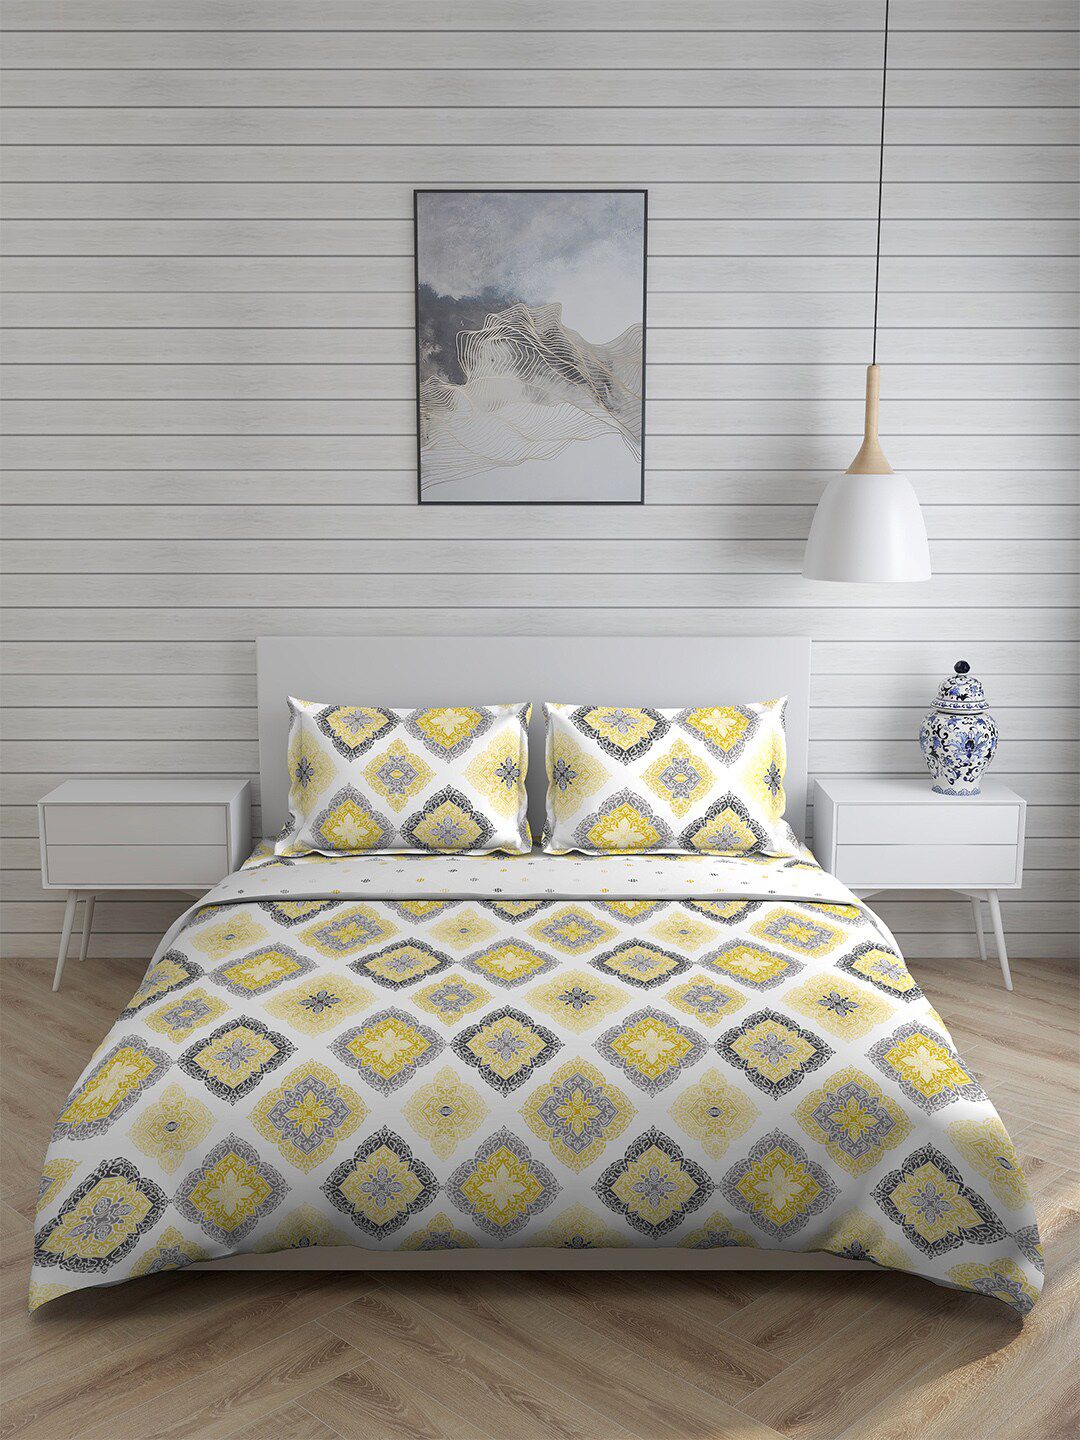 Boutique Living India Yellow & Grey Printed Pure Cotton 225 TC Bedding Set Price in India